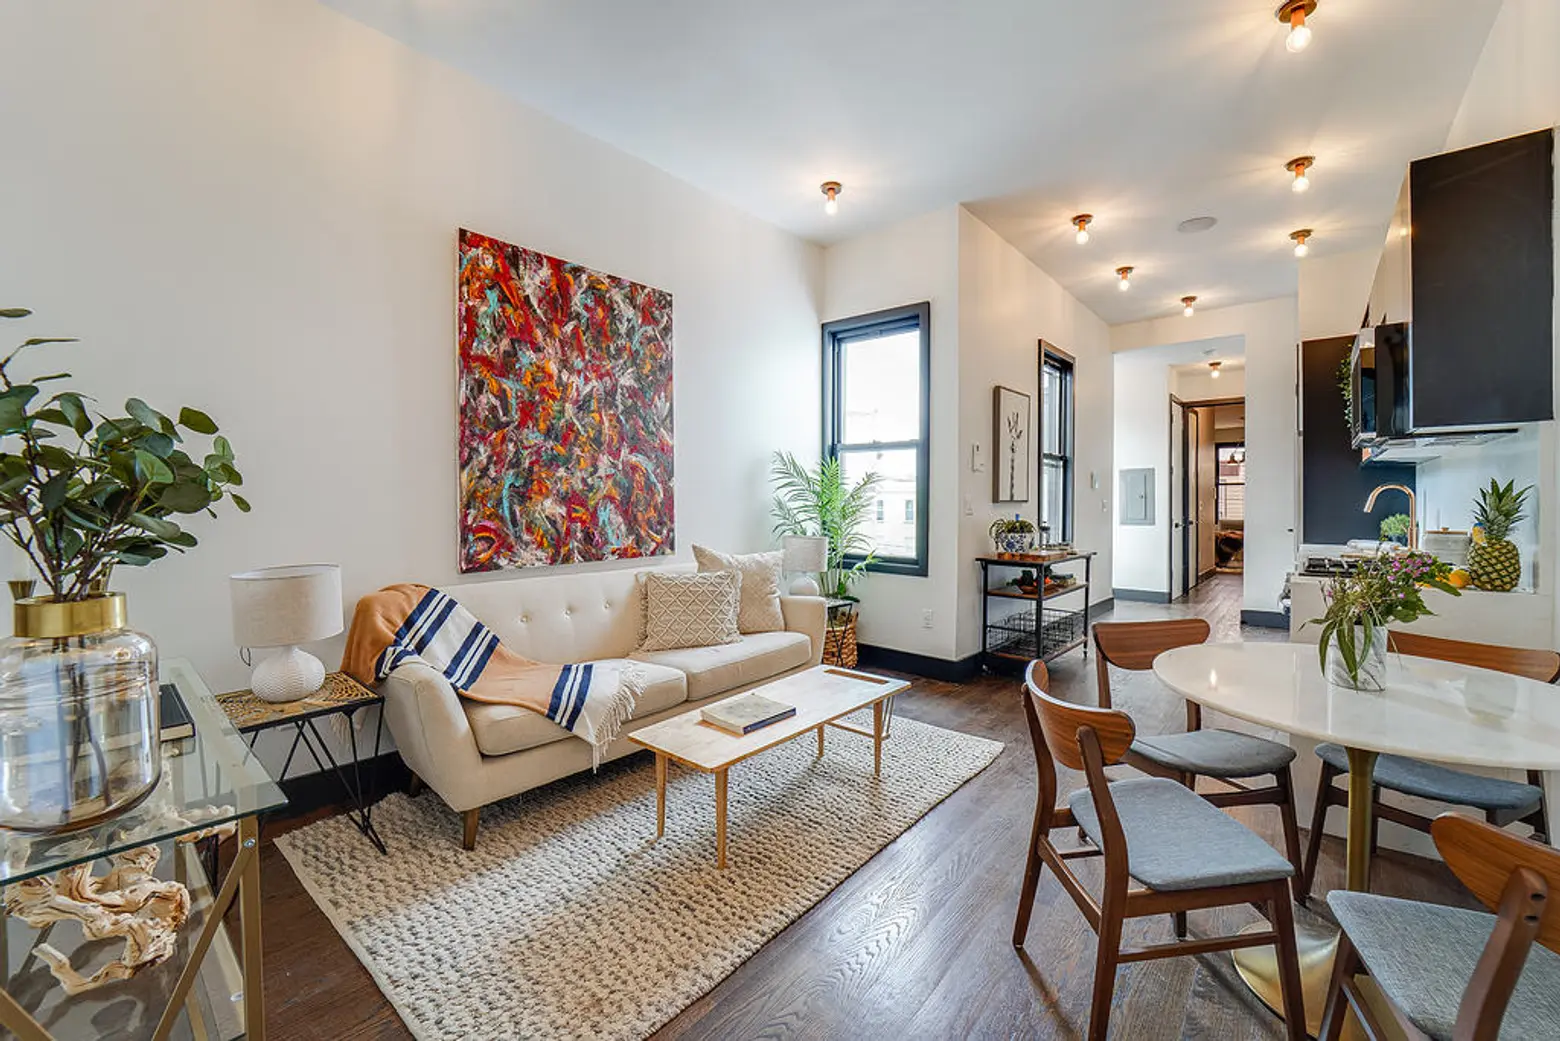 These stylish two-bedroom condos in Jersey City’s Heights neighborhood start at just $480K